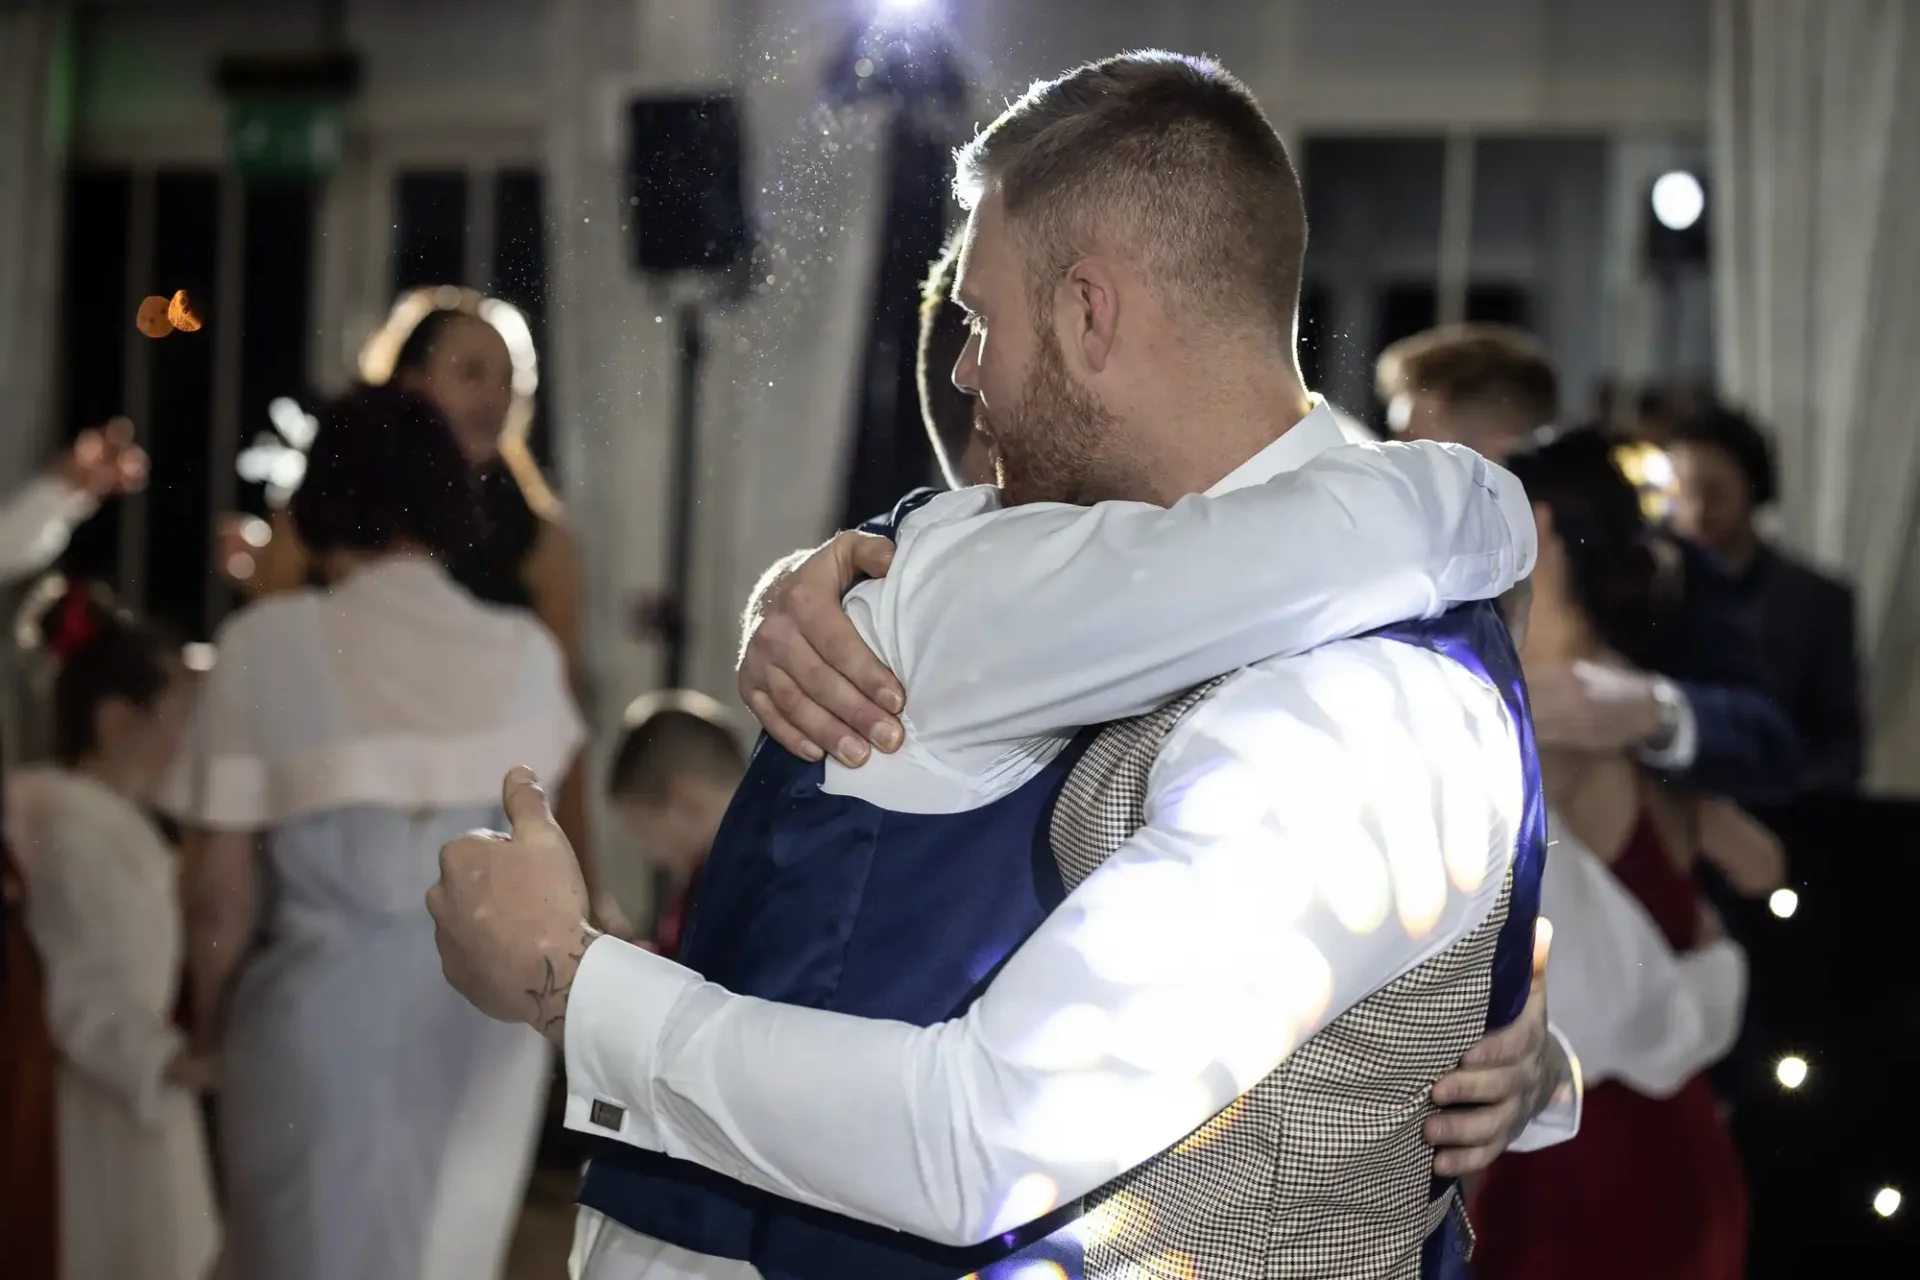 Two men embracing at a wedding reception, one giving a thumbs-up, with guests in the background and a flash of light capturing floating particles in the air.